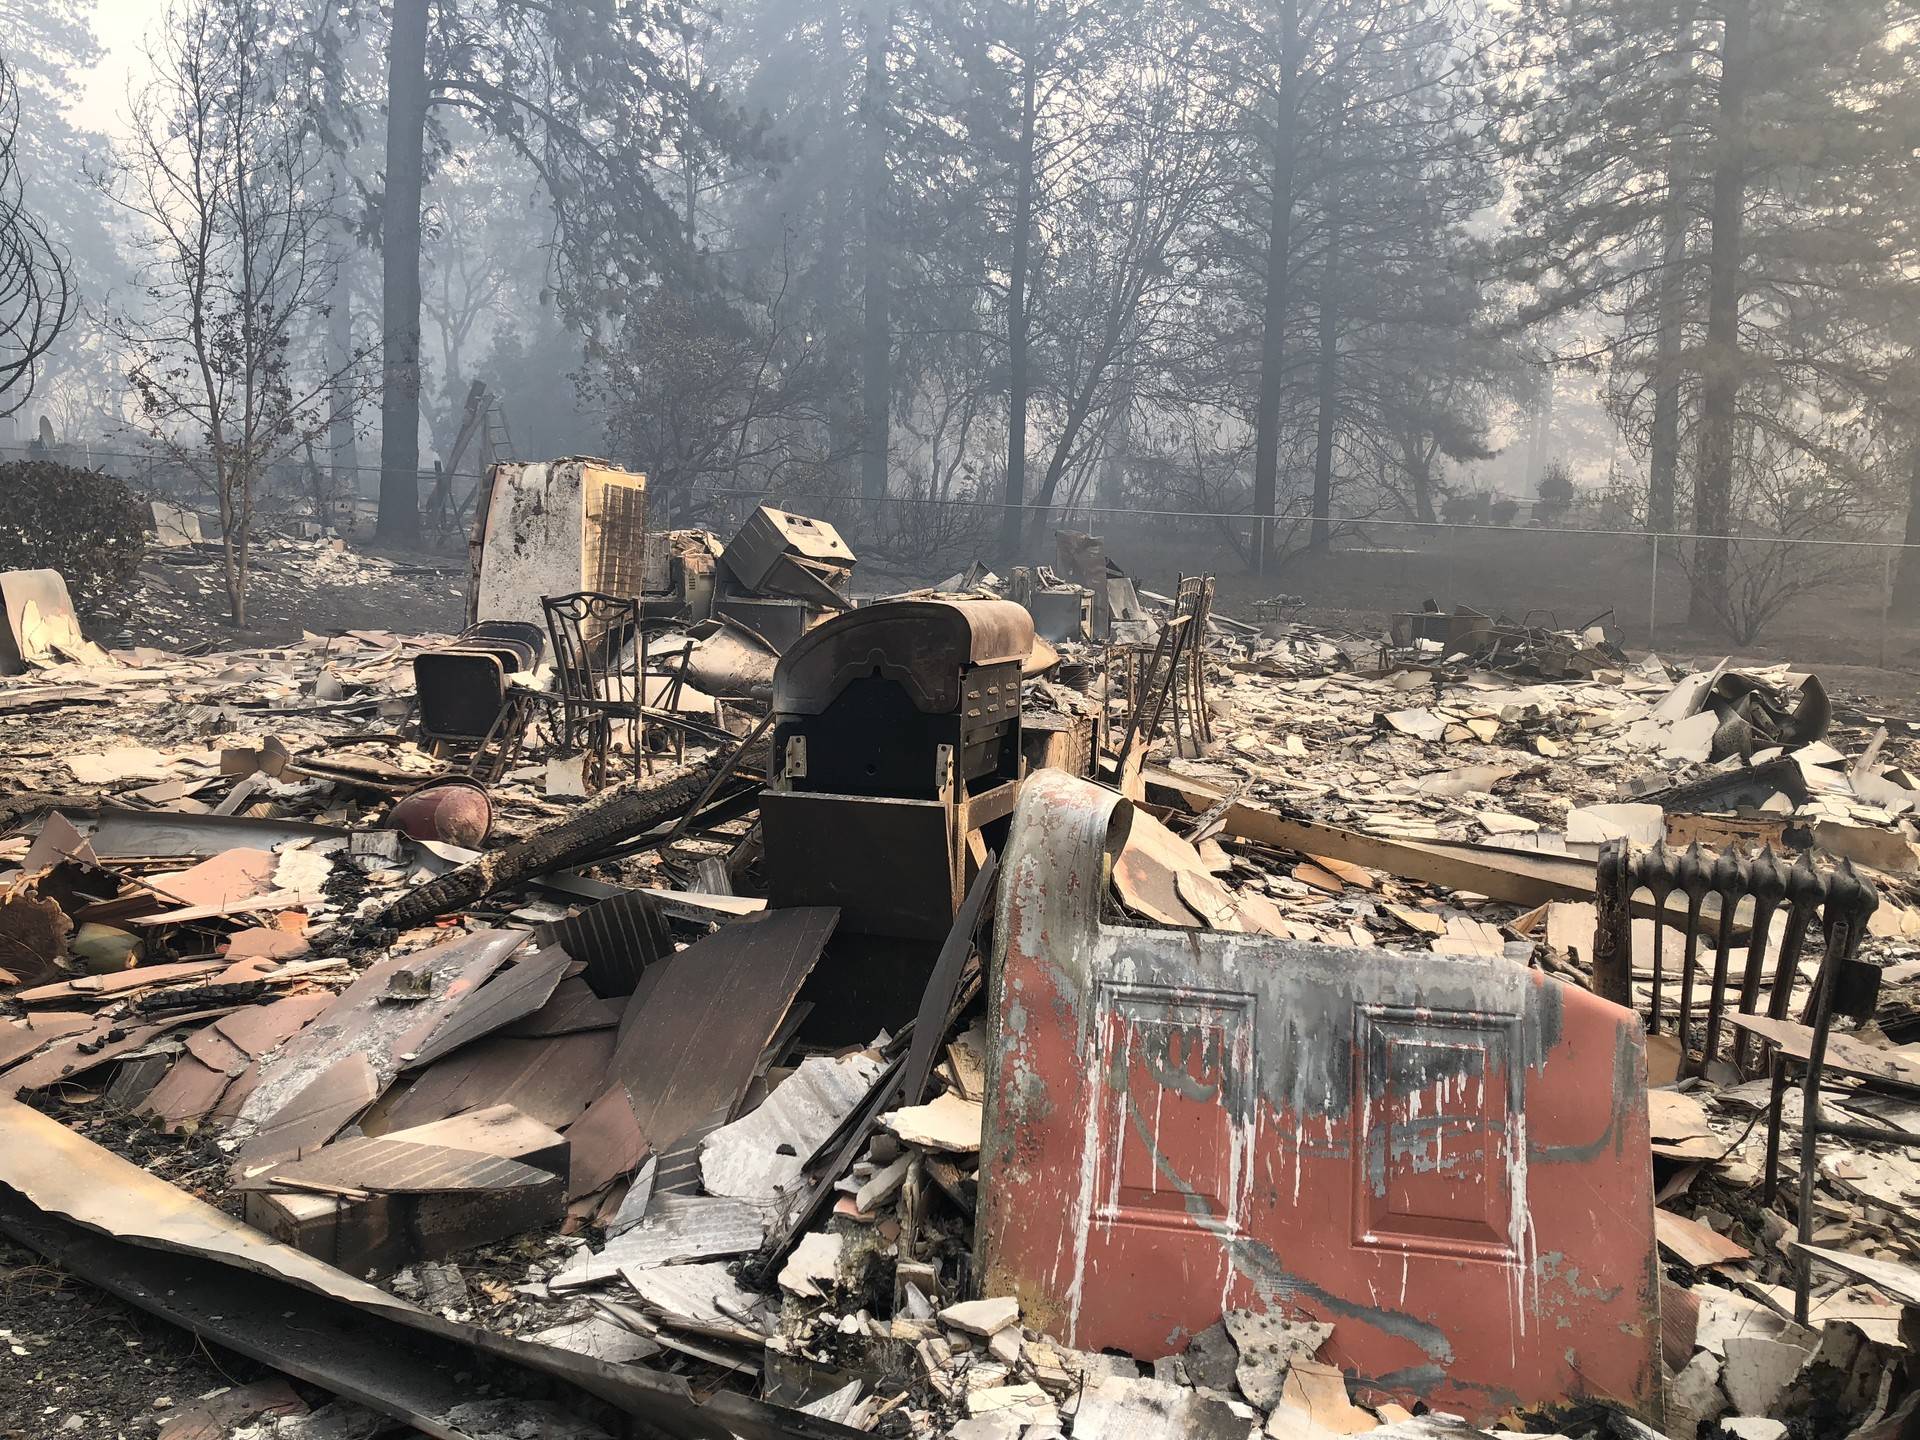 Thousands of buildings, like this apartment building in Paradise, burned to the ground in the Camp Fire. Sonja Hutson/KQED